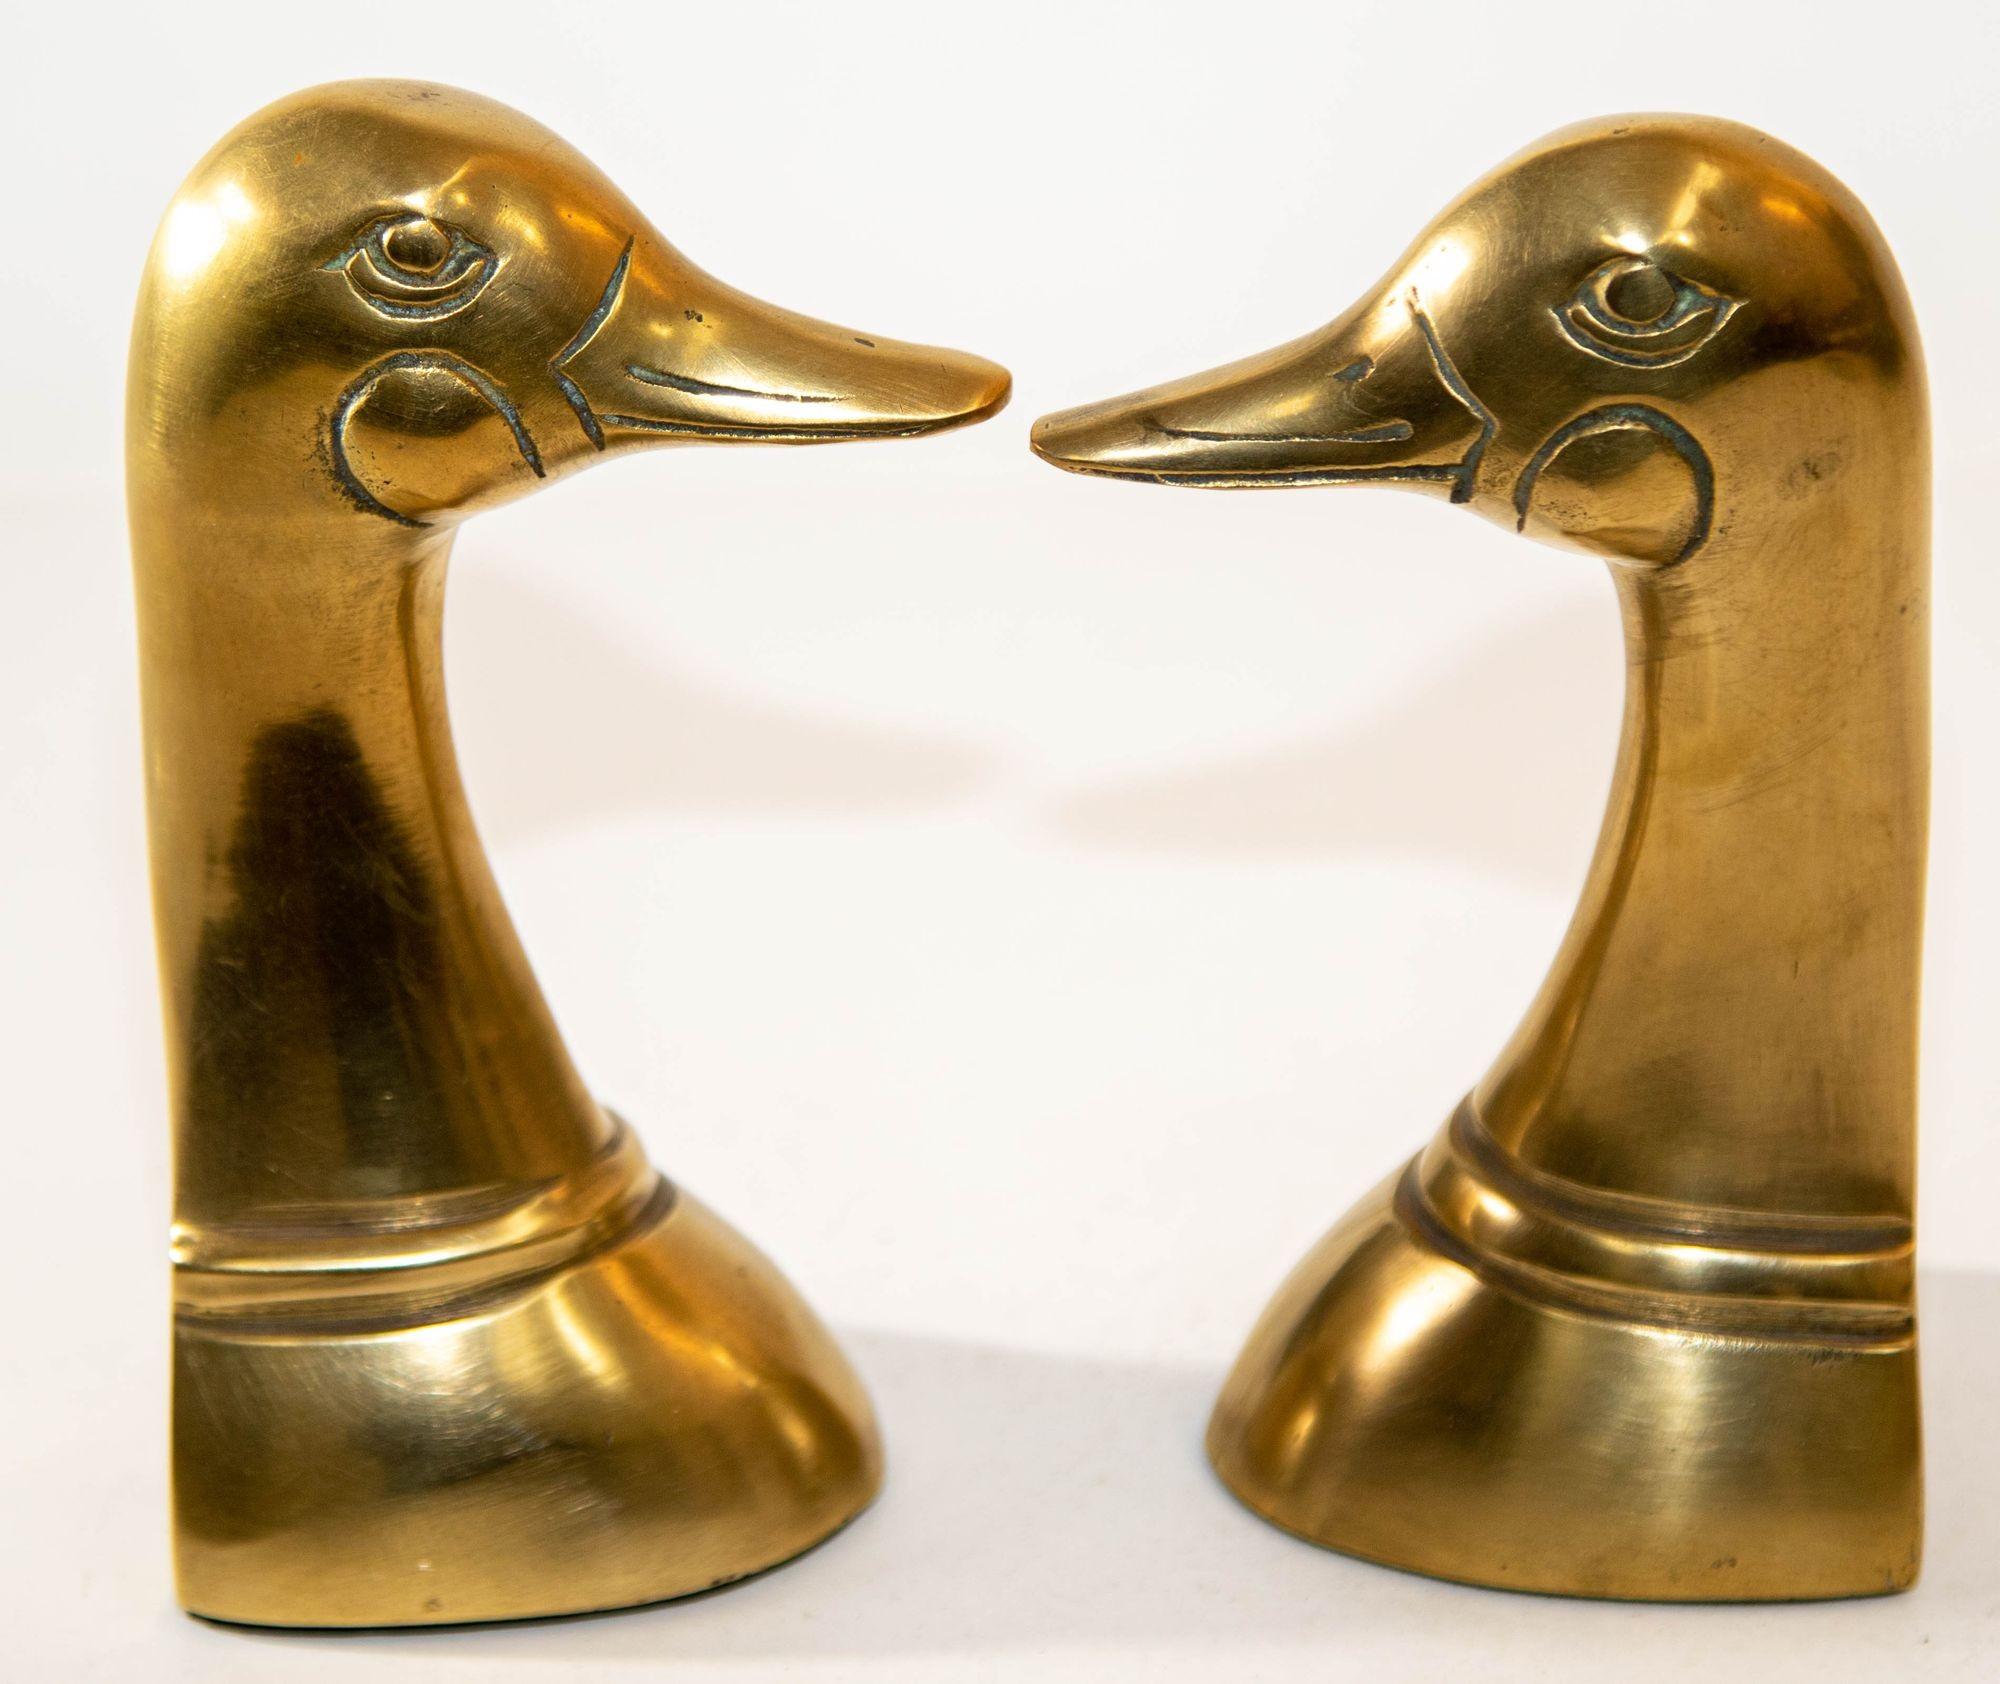 Polished Solid Brass Mallard Duck Head Bookends Sarreid Style 1950's A Pair In Good Condition For Sale In North Hollywood, CA